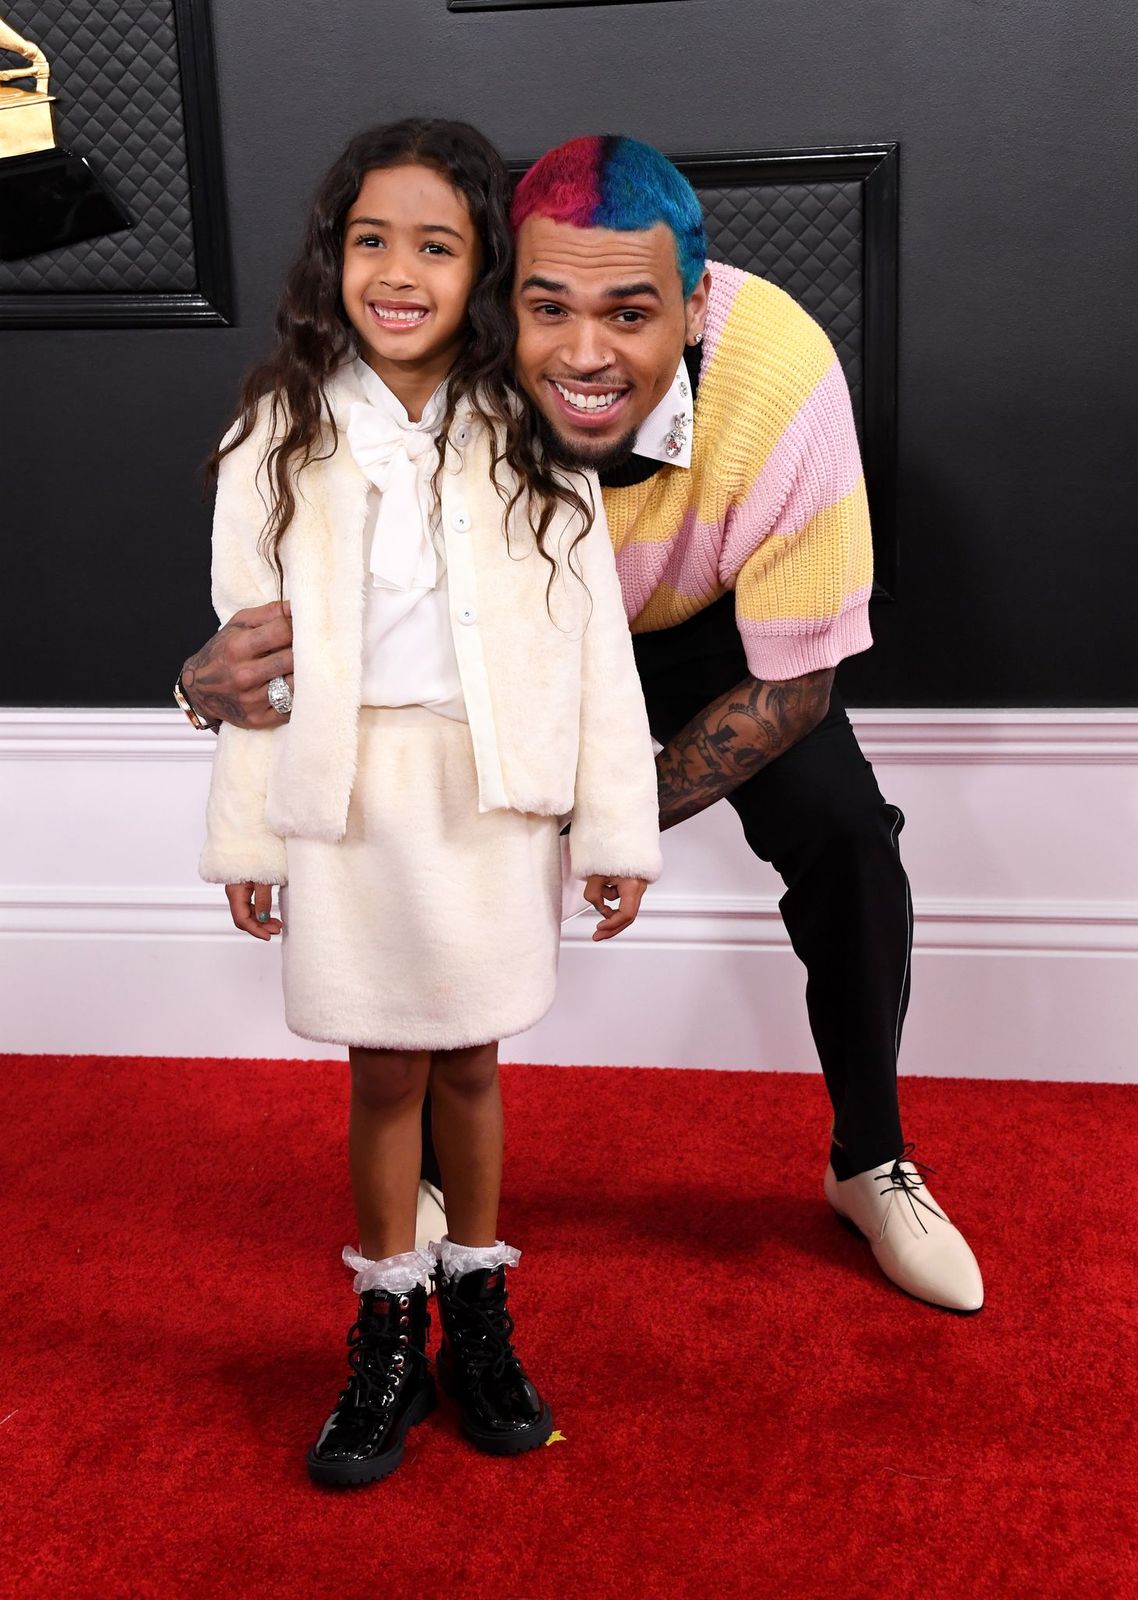 Chris Brown and daughter Royalty Brown at the 62nd Annual Grammy Awards at Staples Center on January 26, 2020 in Los Angeles, California | Photo: Getty Images